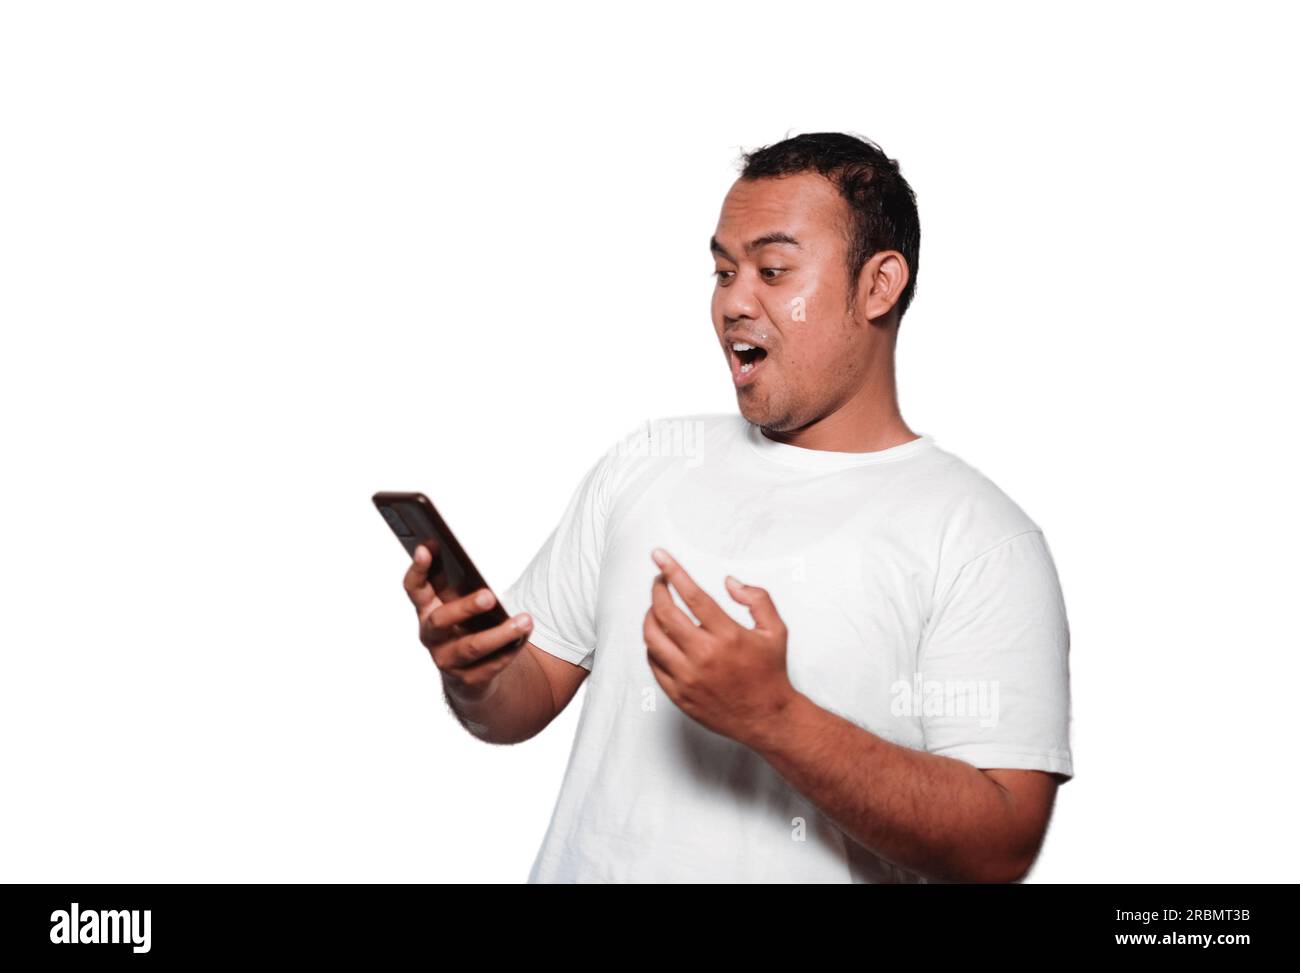 Excited Asian man wearing white Tshirt smiling while holding his phone, isolated by white background Stock Photo